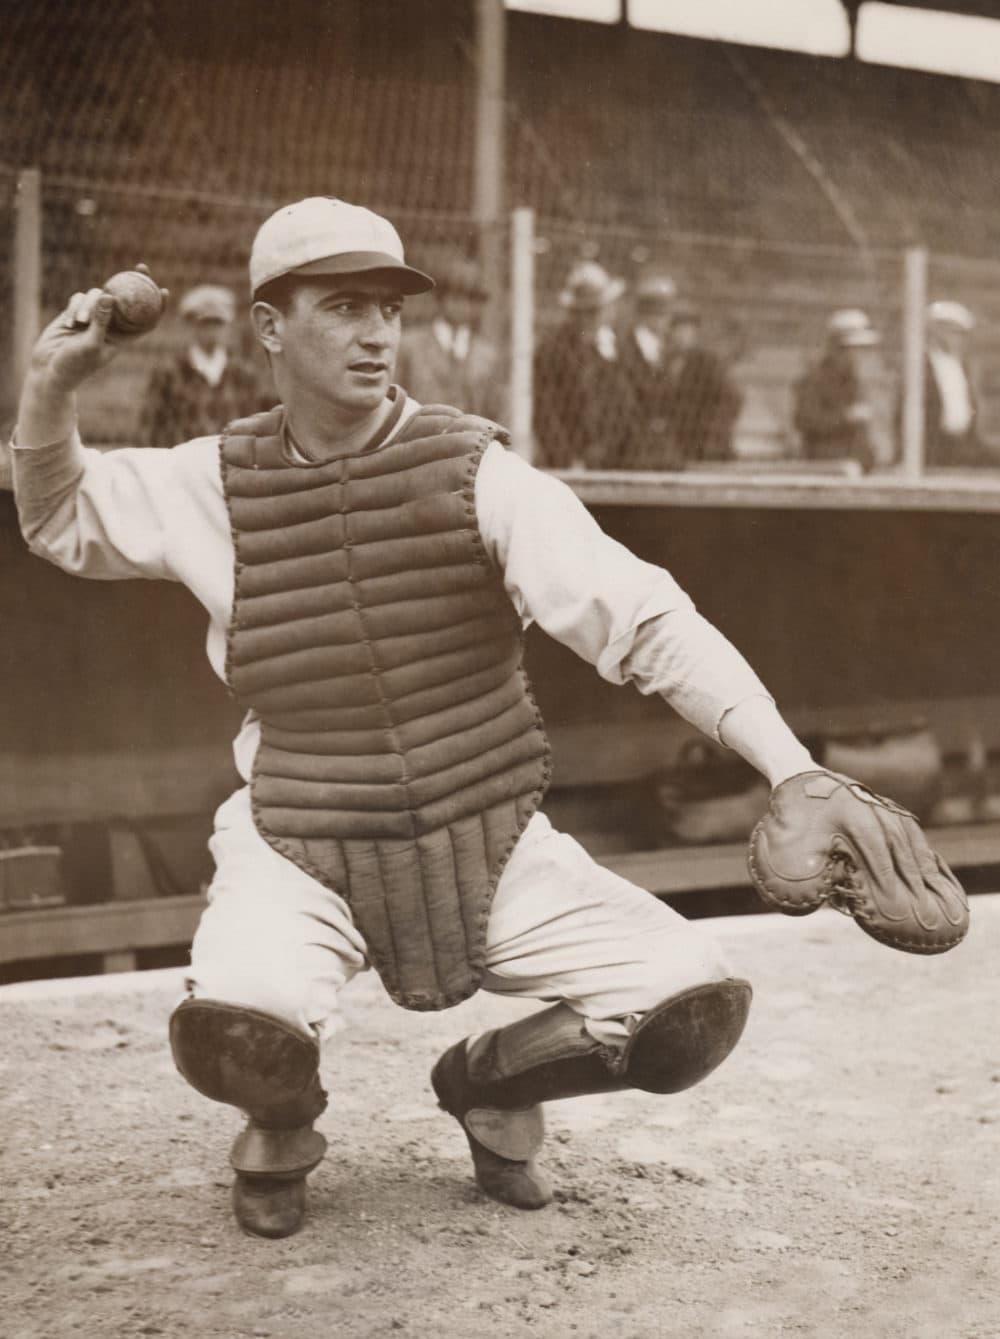 Moe Berg as a catcher during his time in the MLB. (Courtesy Irwin Berg)